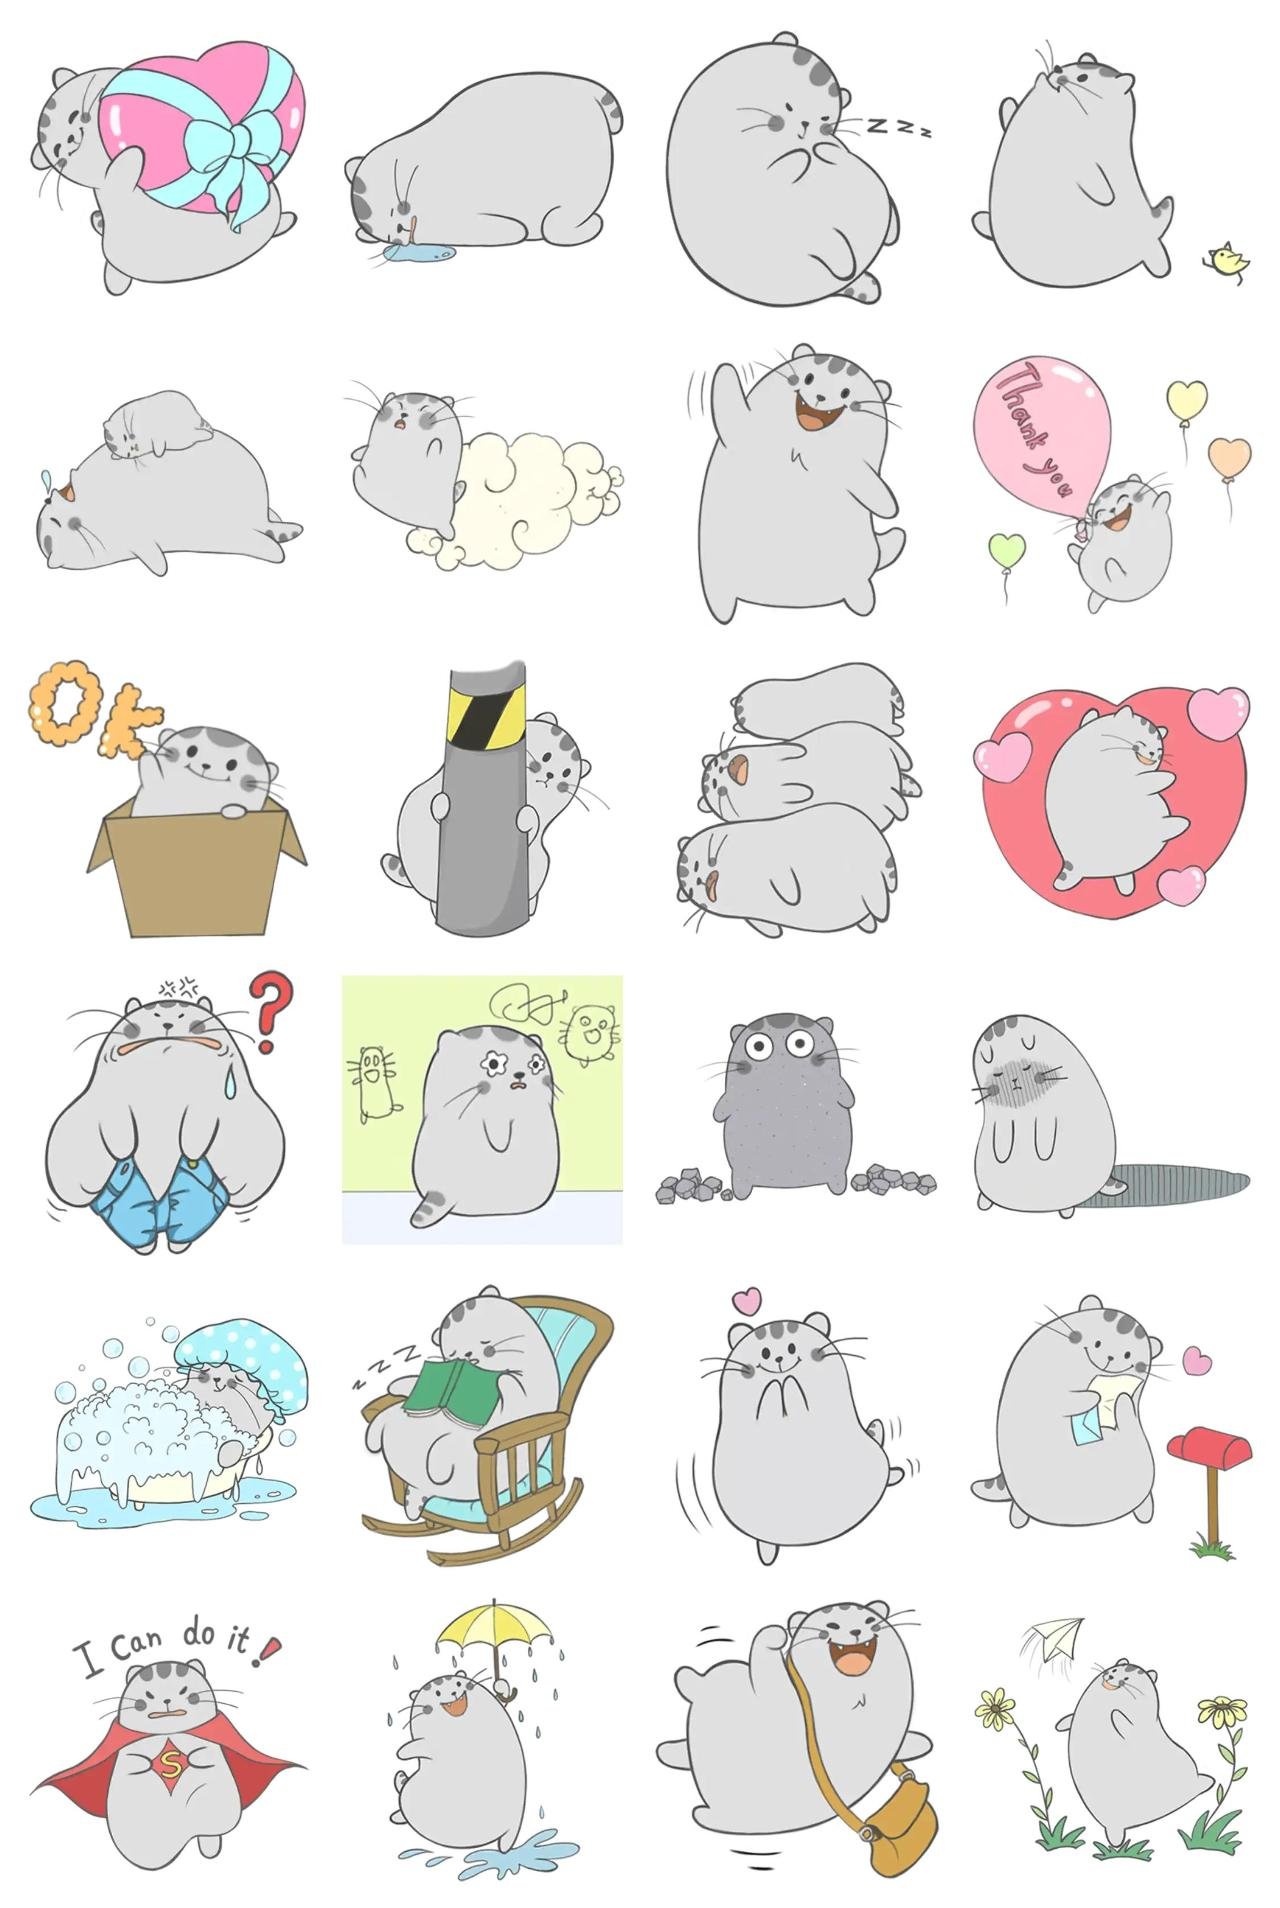 Cute Cat Dudu 3 Animals sticker pack for Whatsapp, Telegram, Signal, and others chatting and message apps